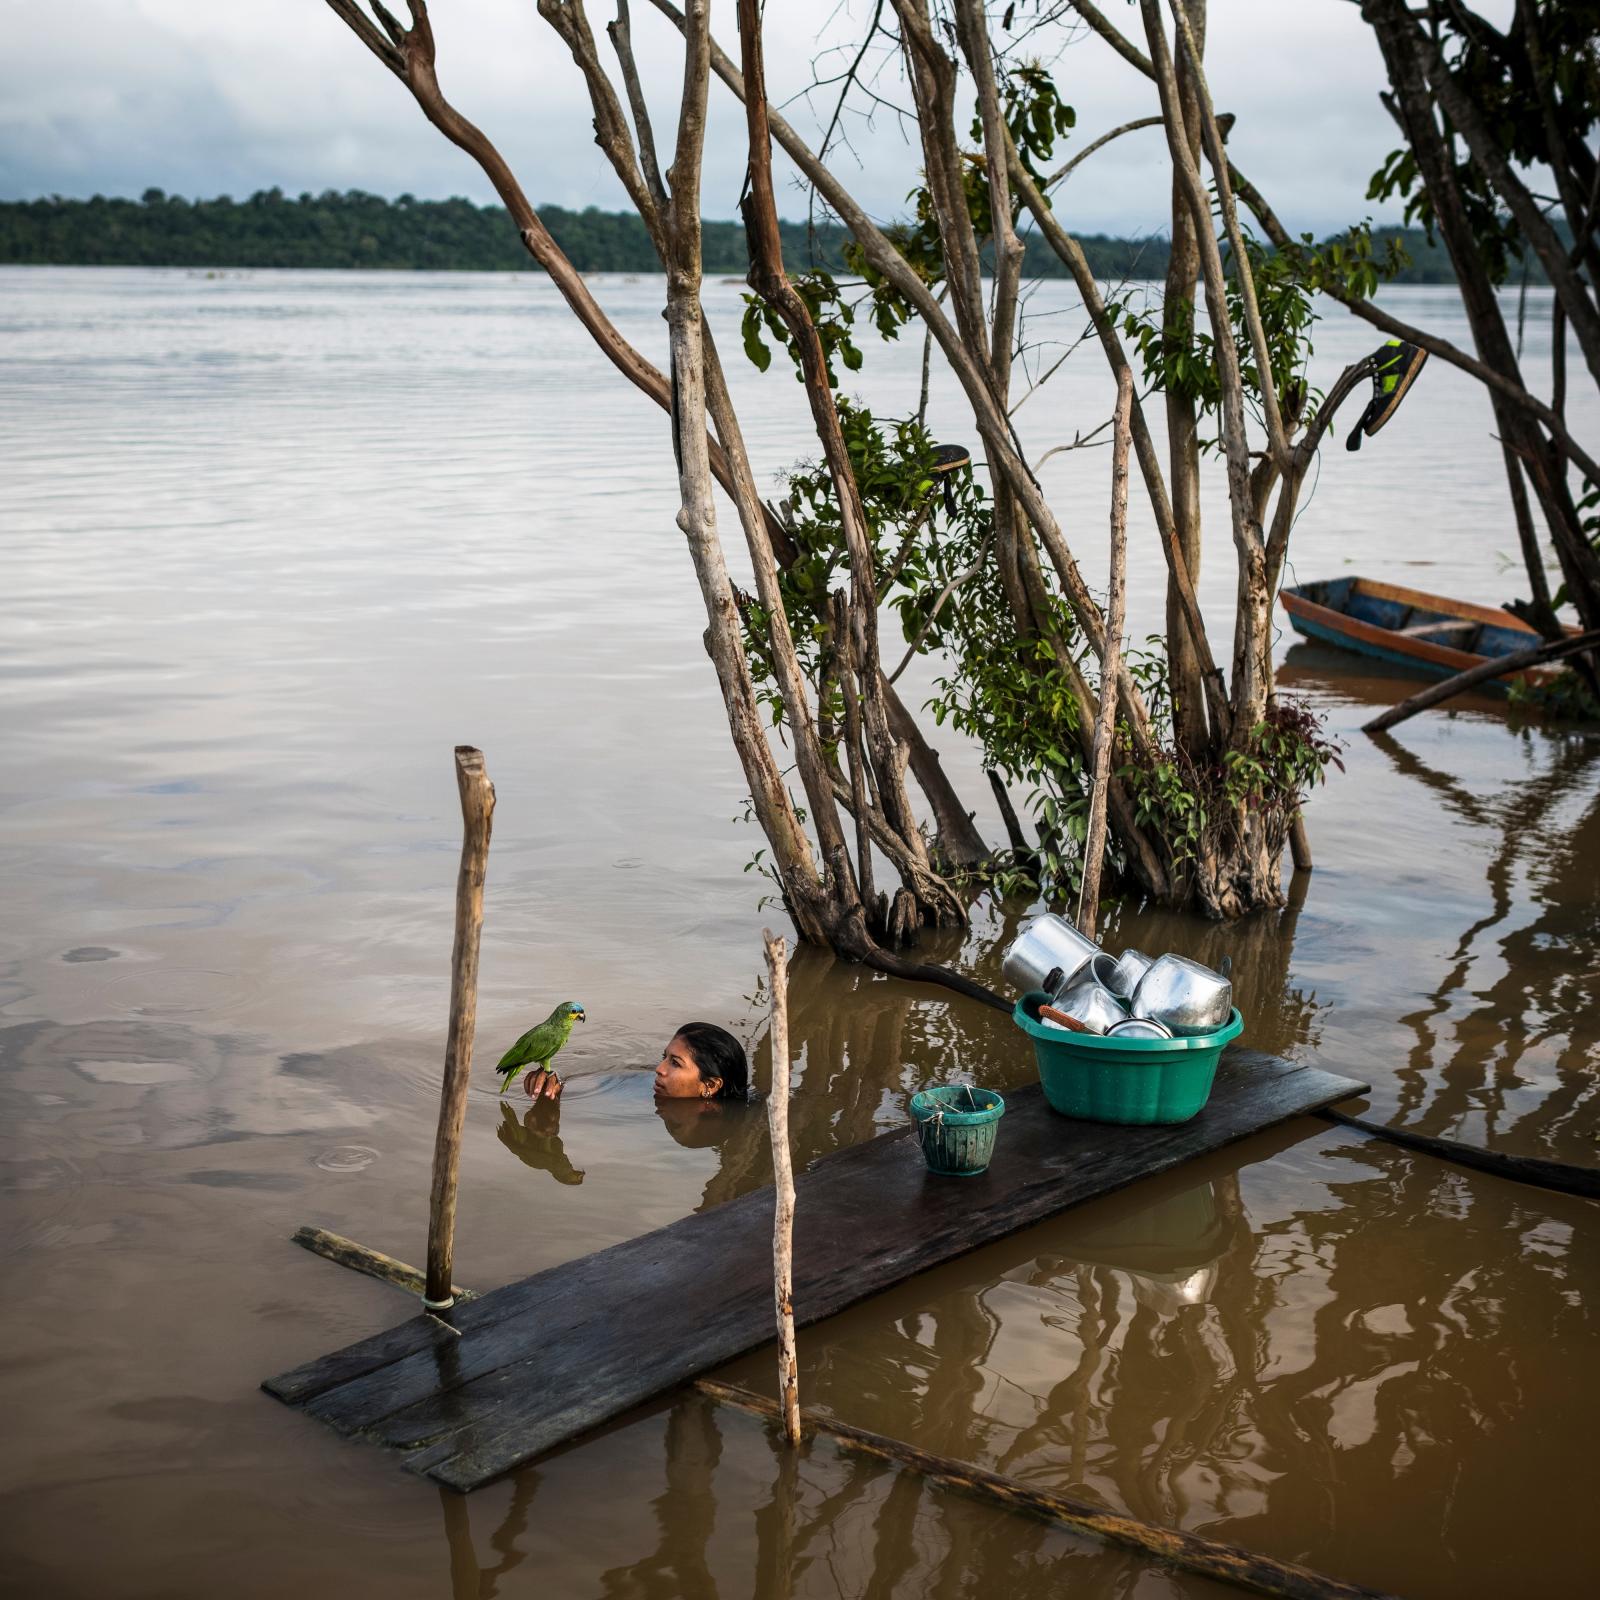 Lucicleide Kurap of the Munduruku village of Dace Watpu has a moment with a pet parakeet after washing dishes in the Tapajos River in Para State, Brazil. 2016 